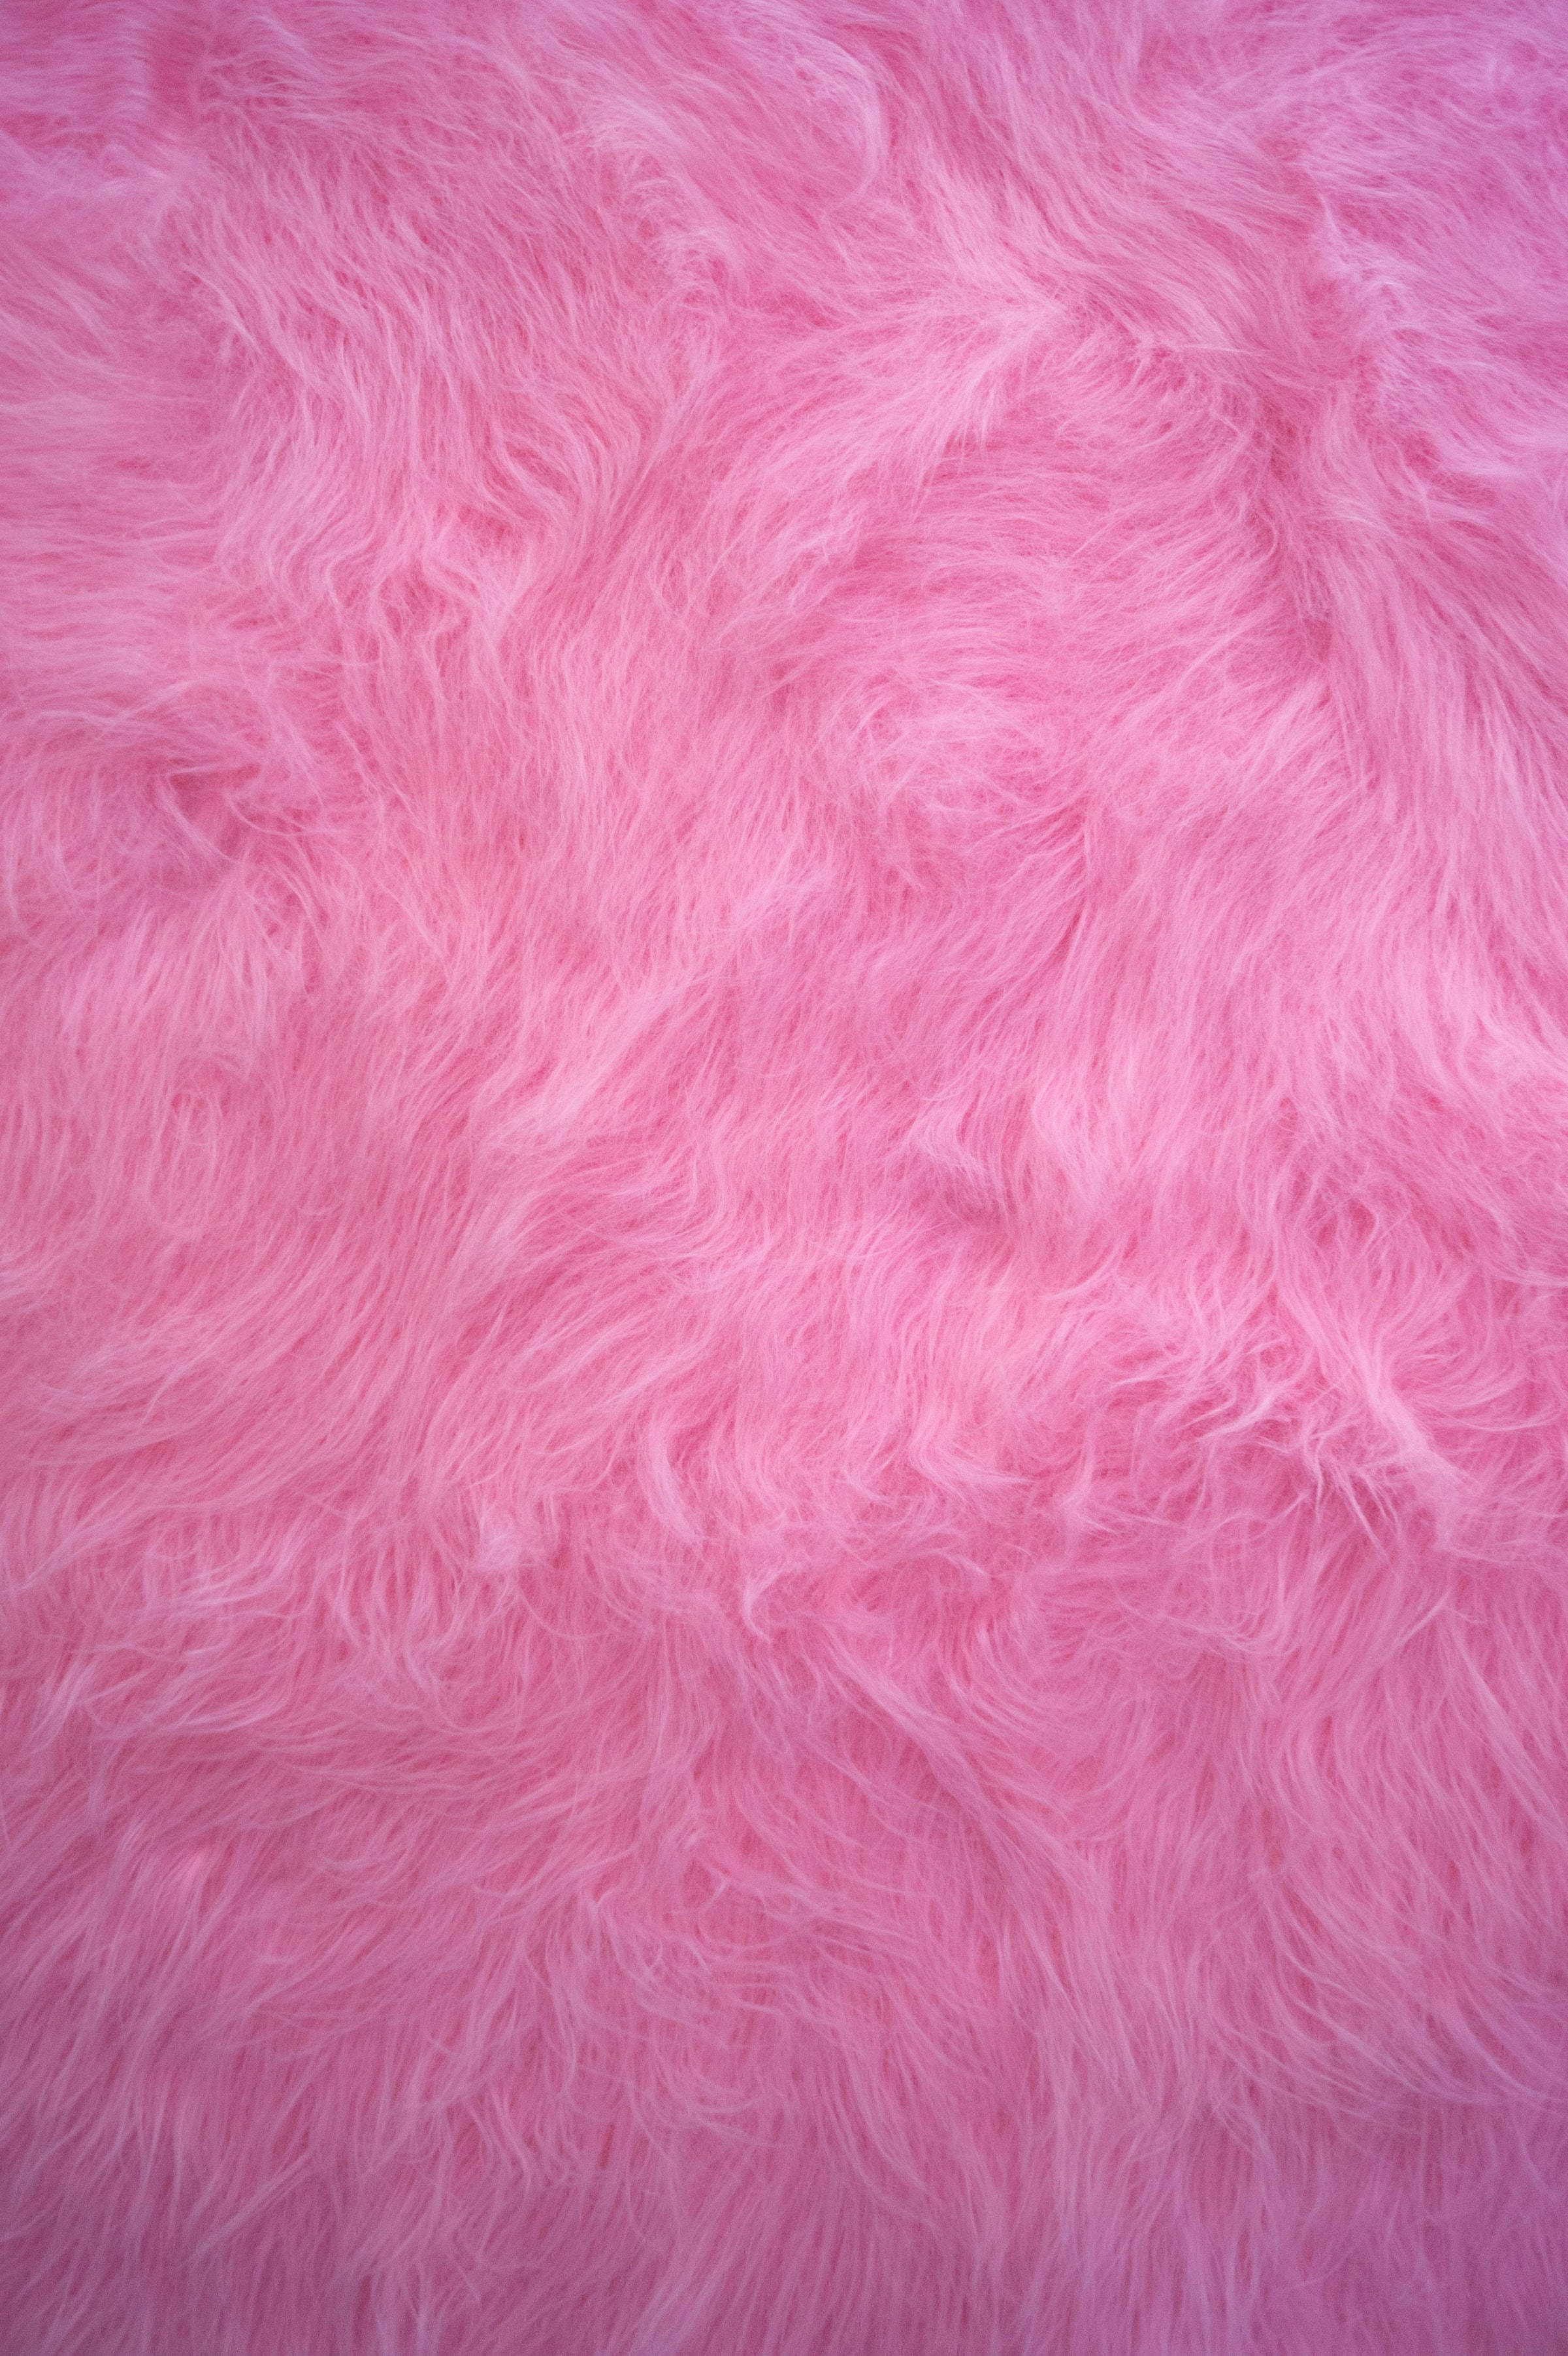 Cute Pink Aesthetic Faux Fabric